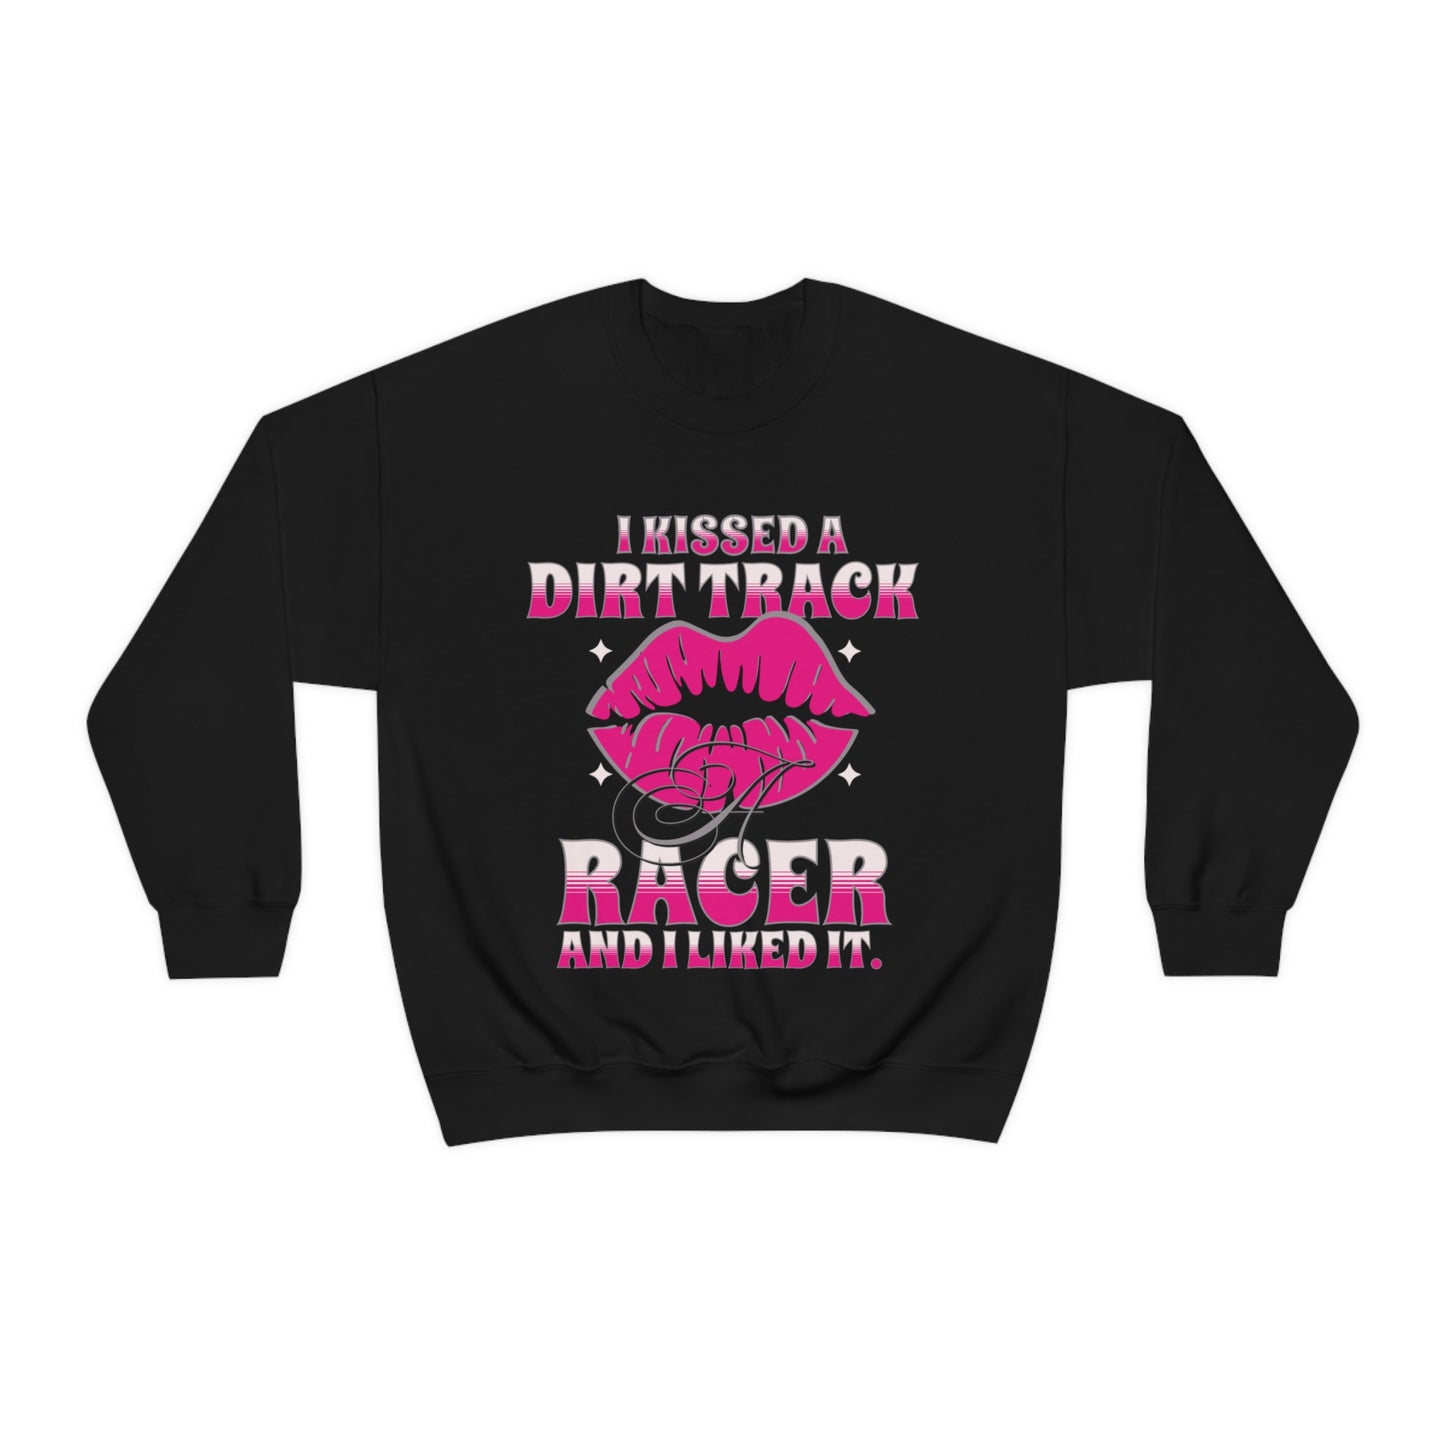 I Kissed A Dirt Track Racer And I Liked It Crewneck Sweatshirt